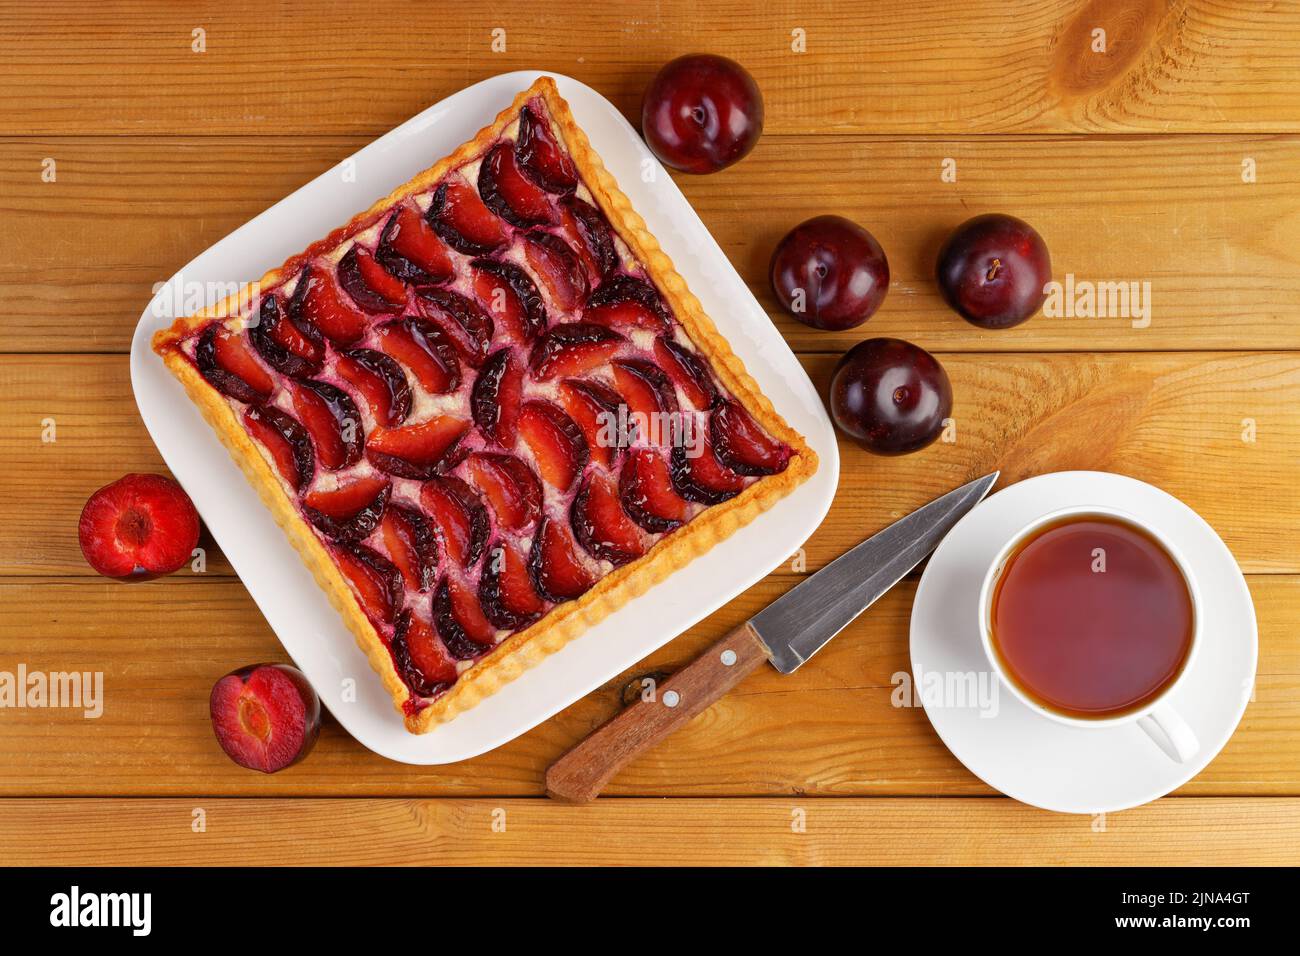 Homemade plum cake and cup of tea on wooden table. Top view. Stock Photo